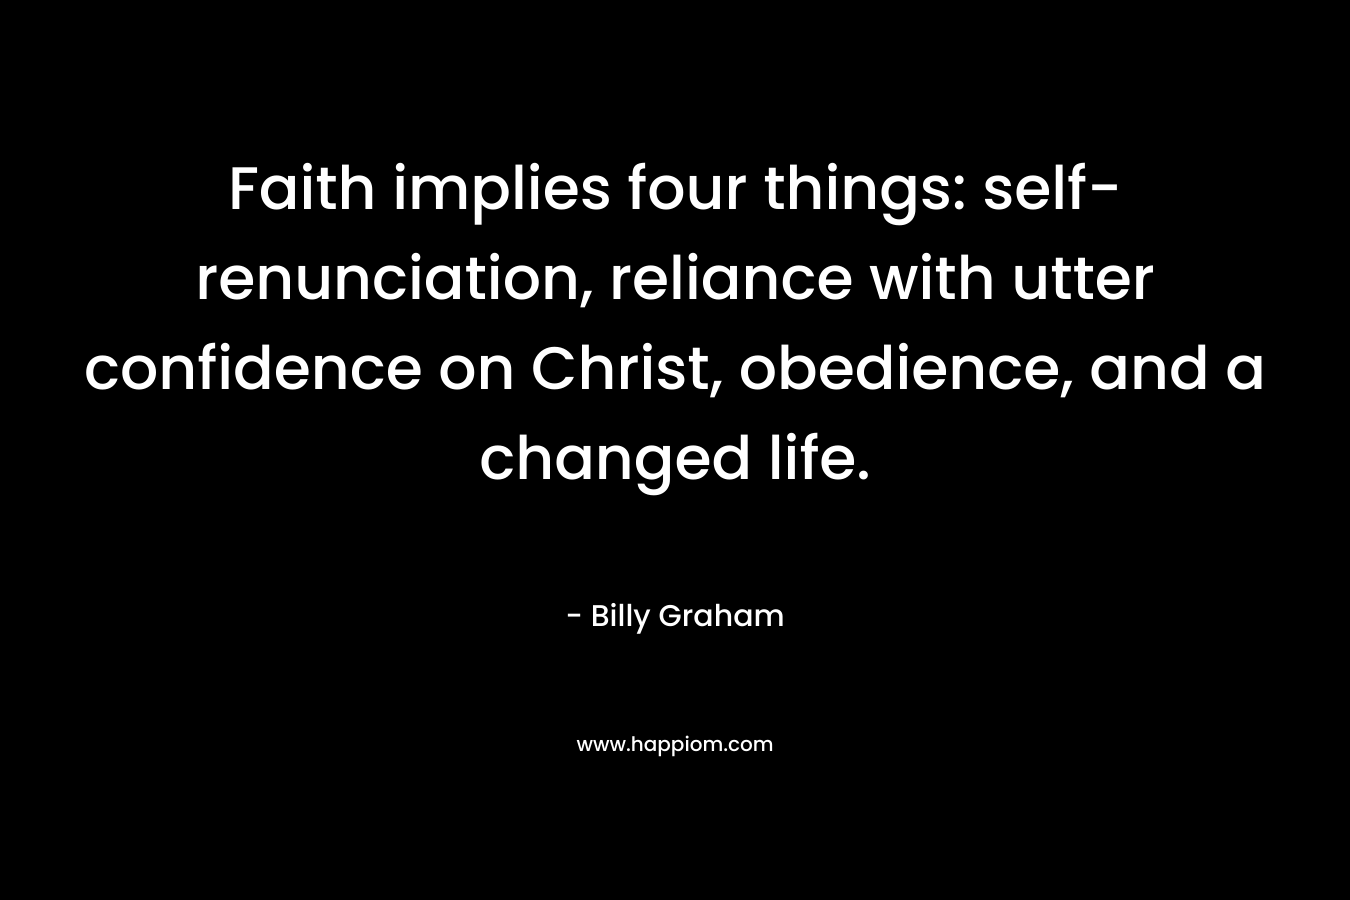 Faith implies four things: self-renunciation, reliance with utter confidence on Christ, obedience, and a changed life. – Billy Graham